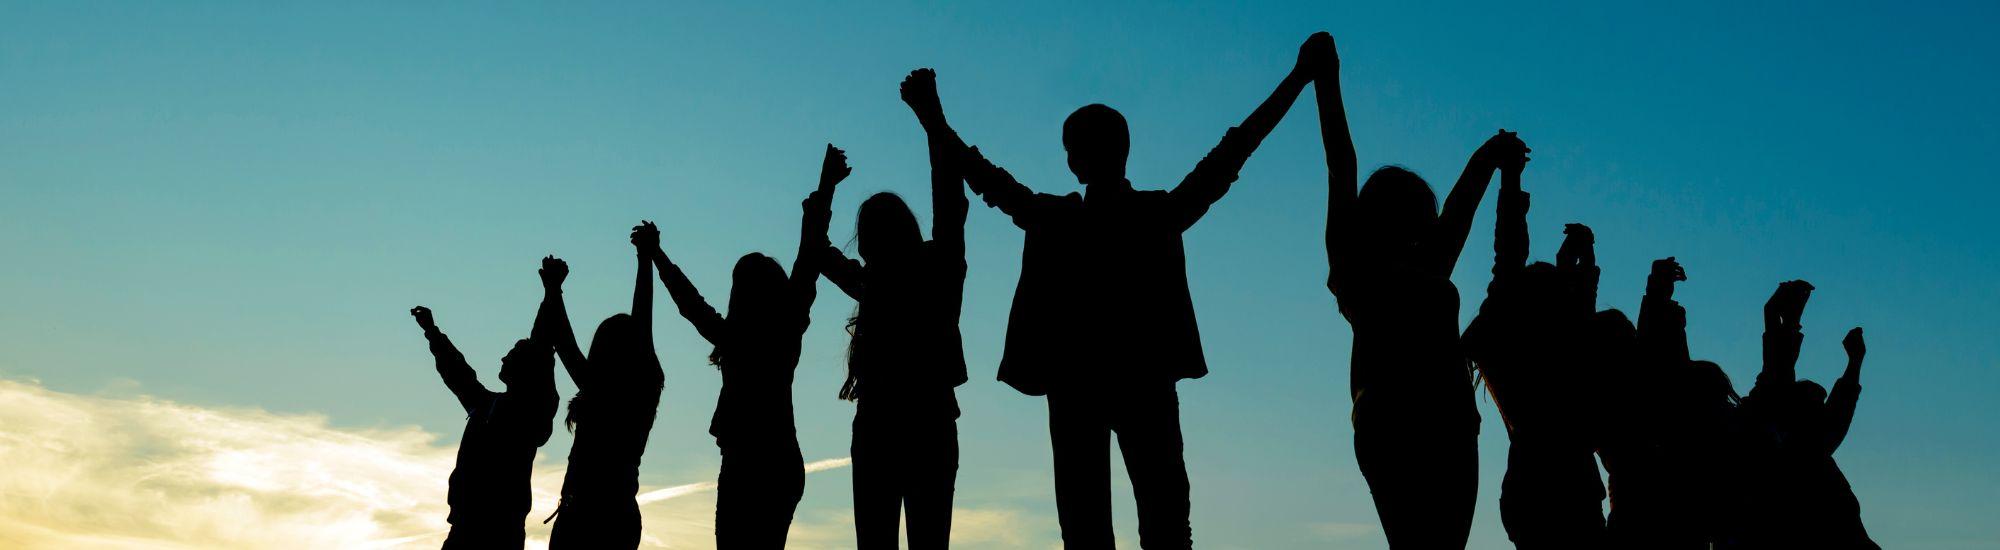 ten shadowed people standing with arms raised holding hands against a blue sky